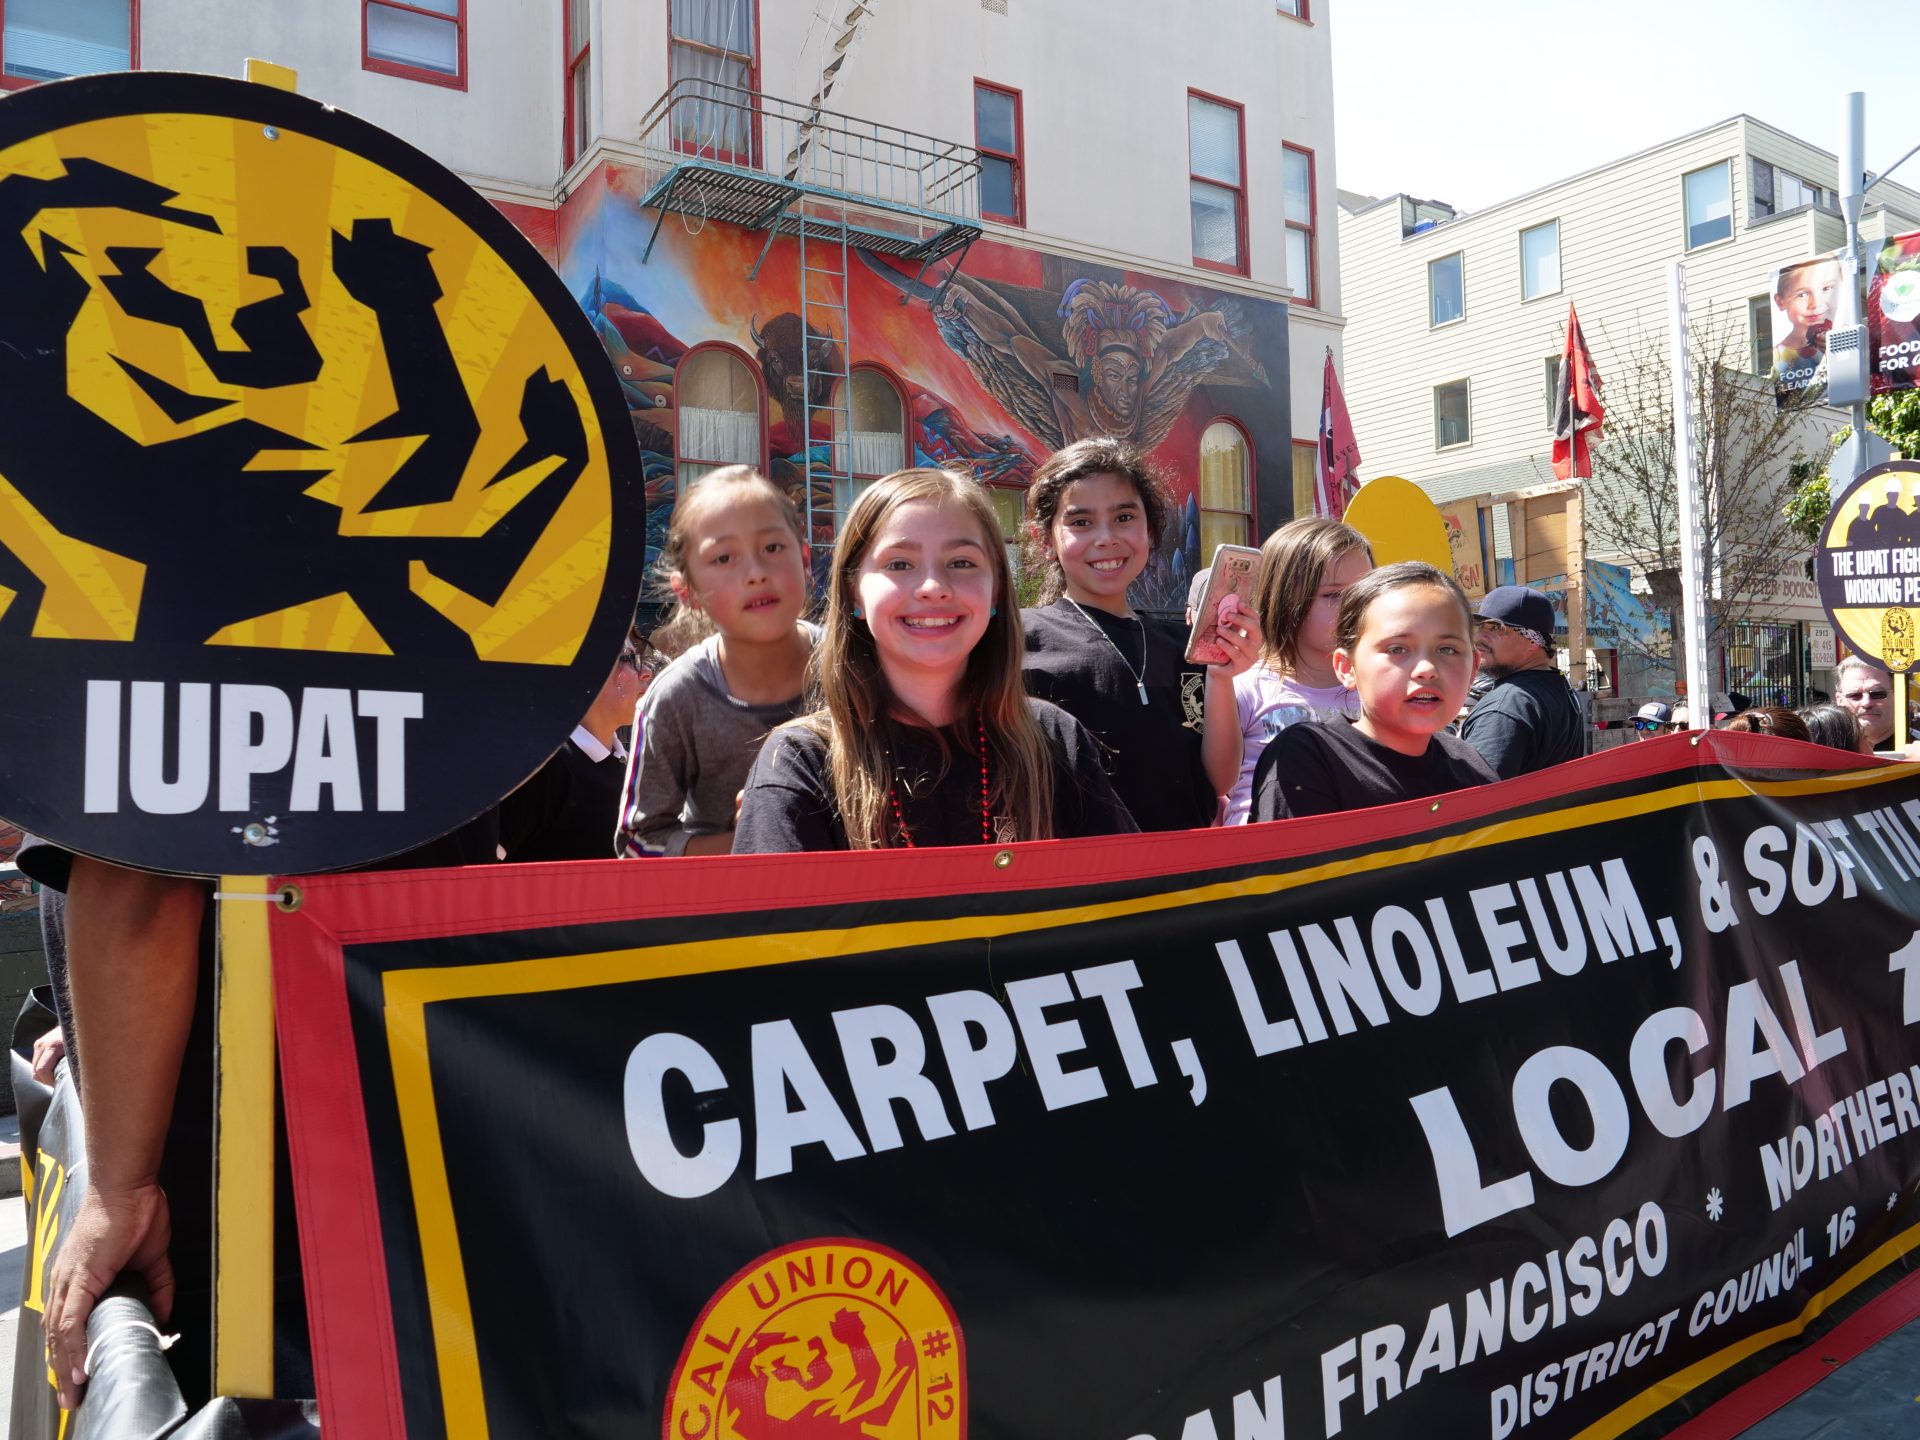 Image from the Gallery: Cesar Chavez Parade – San Francisco, CA